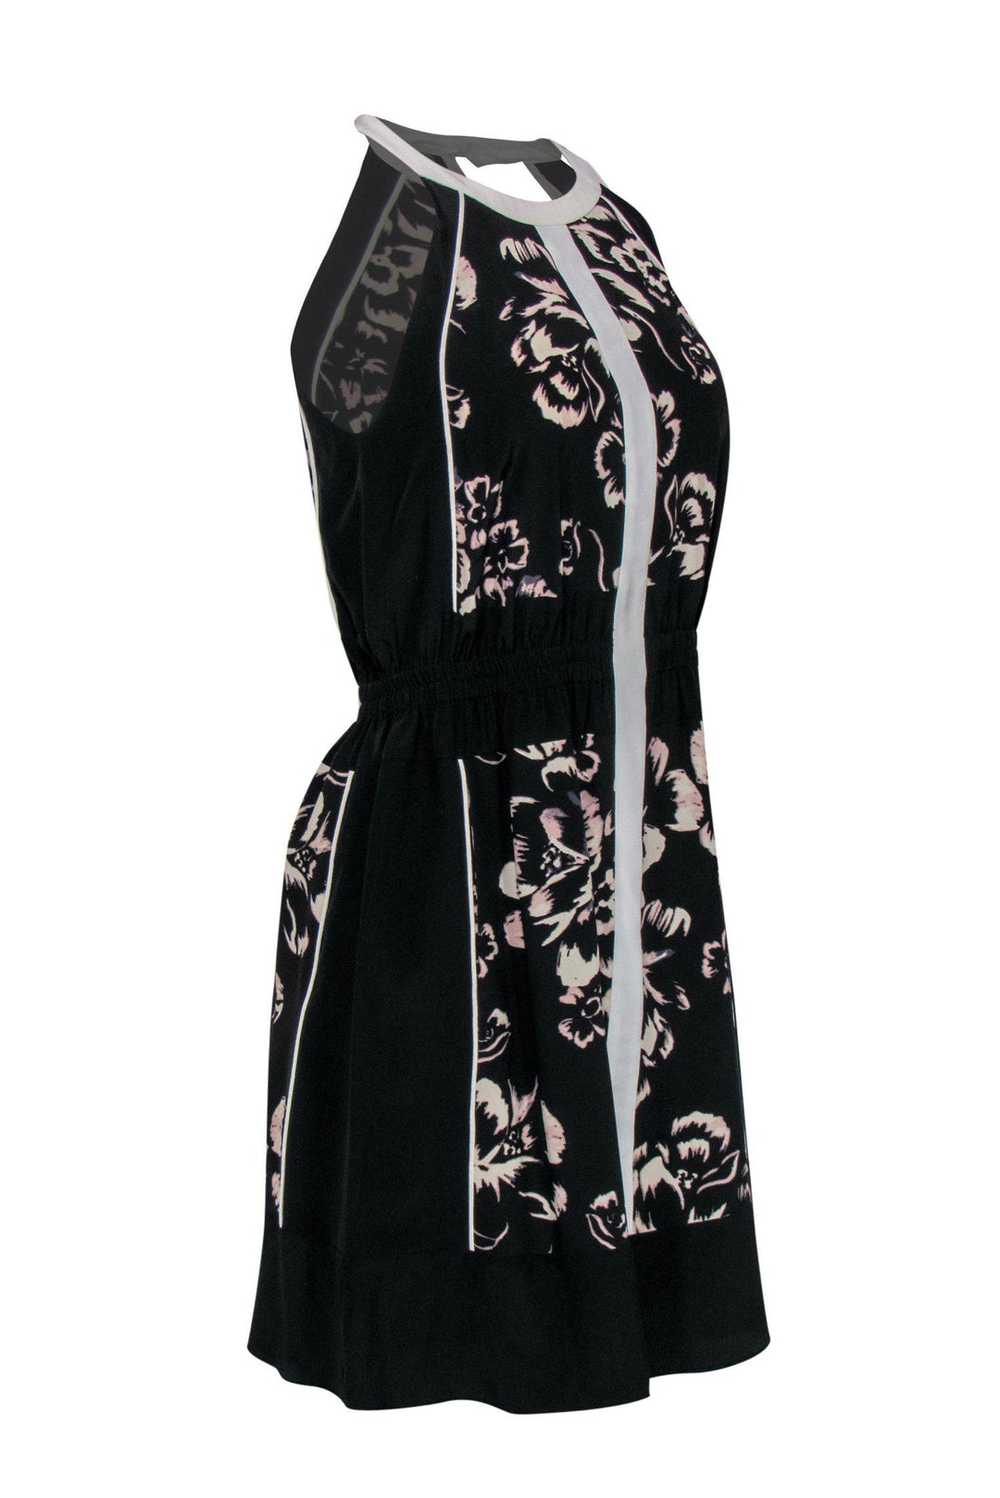 Rebecca Taylor - Black & White Silk Fitted Dress … - image 2